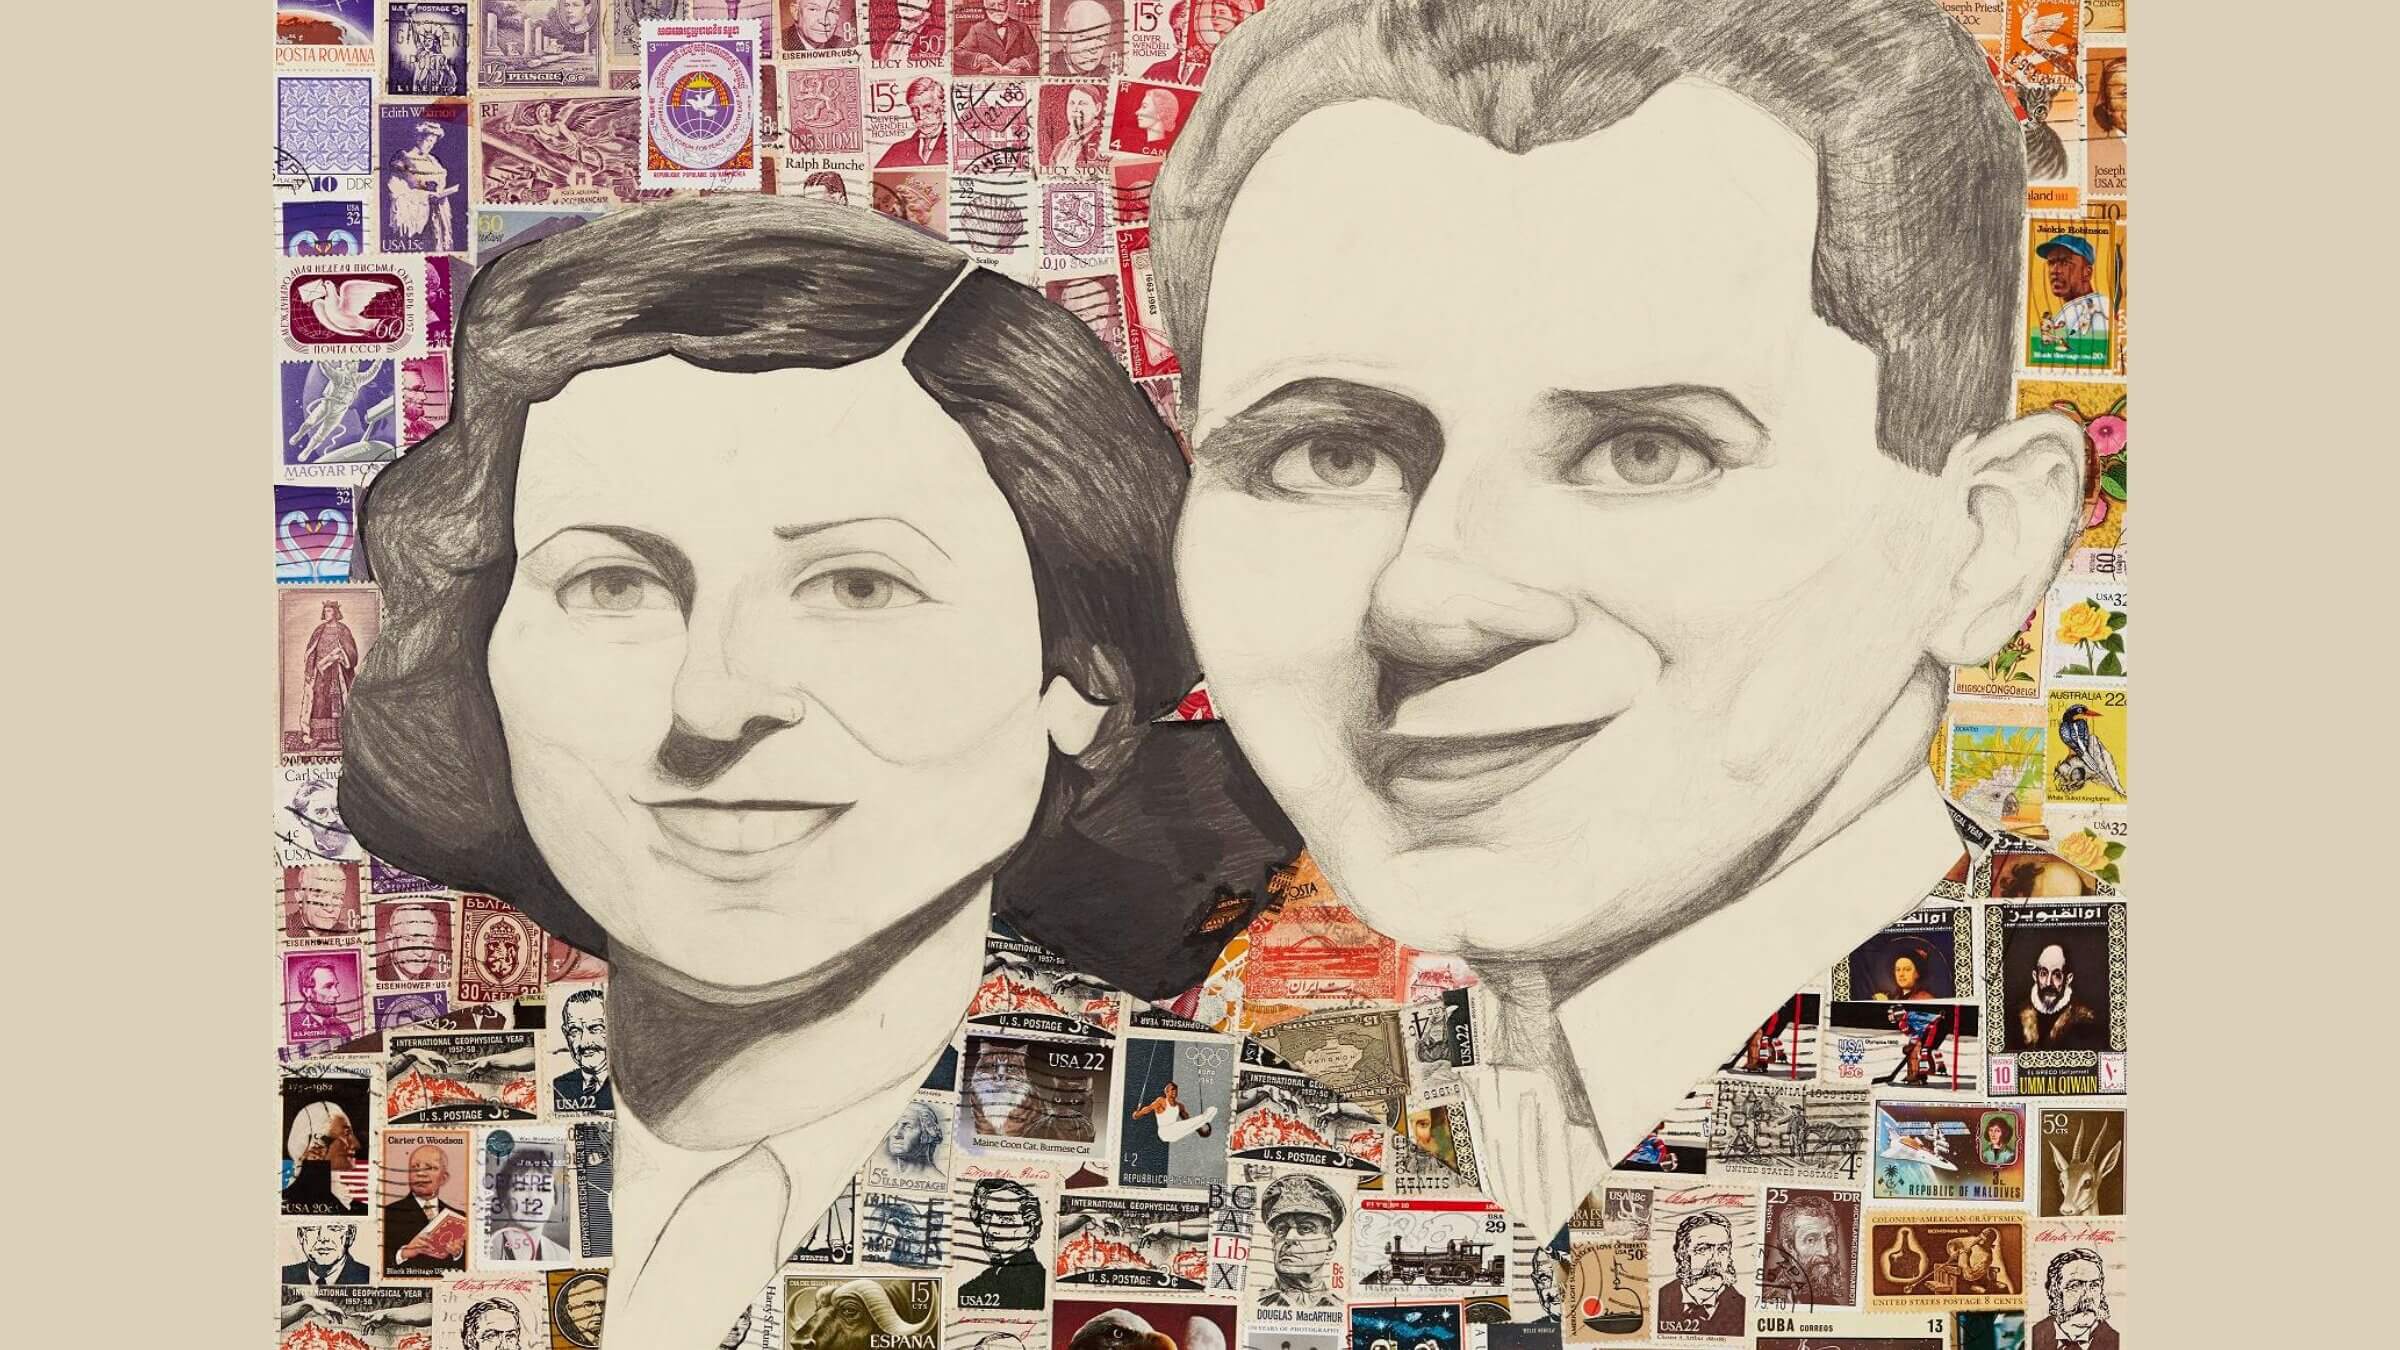 One of 18 collages created by students as part of a project to collect 11 million stamps representing every life lost in the Holocaust. The faces are Holocaust survivors Golde and Sam Weinreb. Students got to know Sam as part of the project.